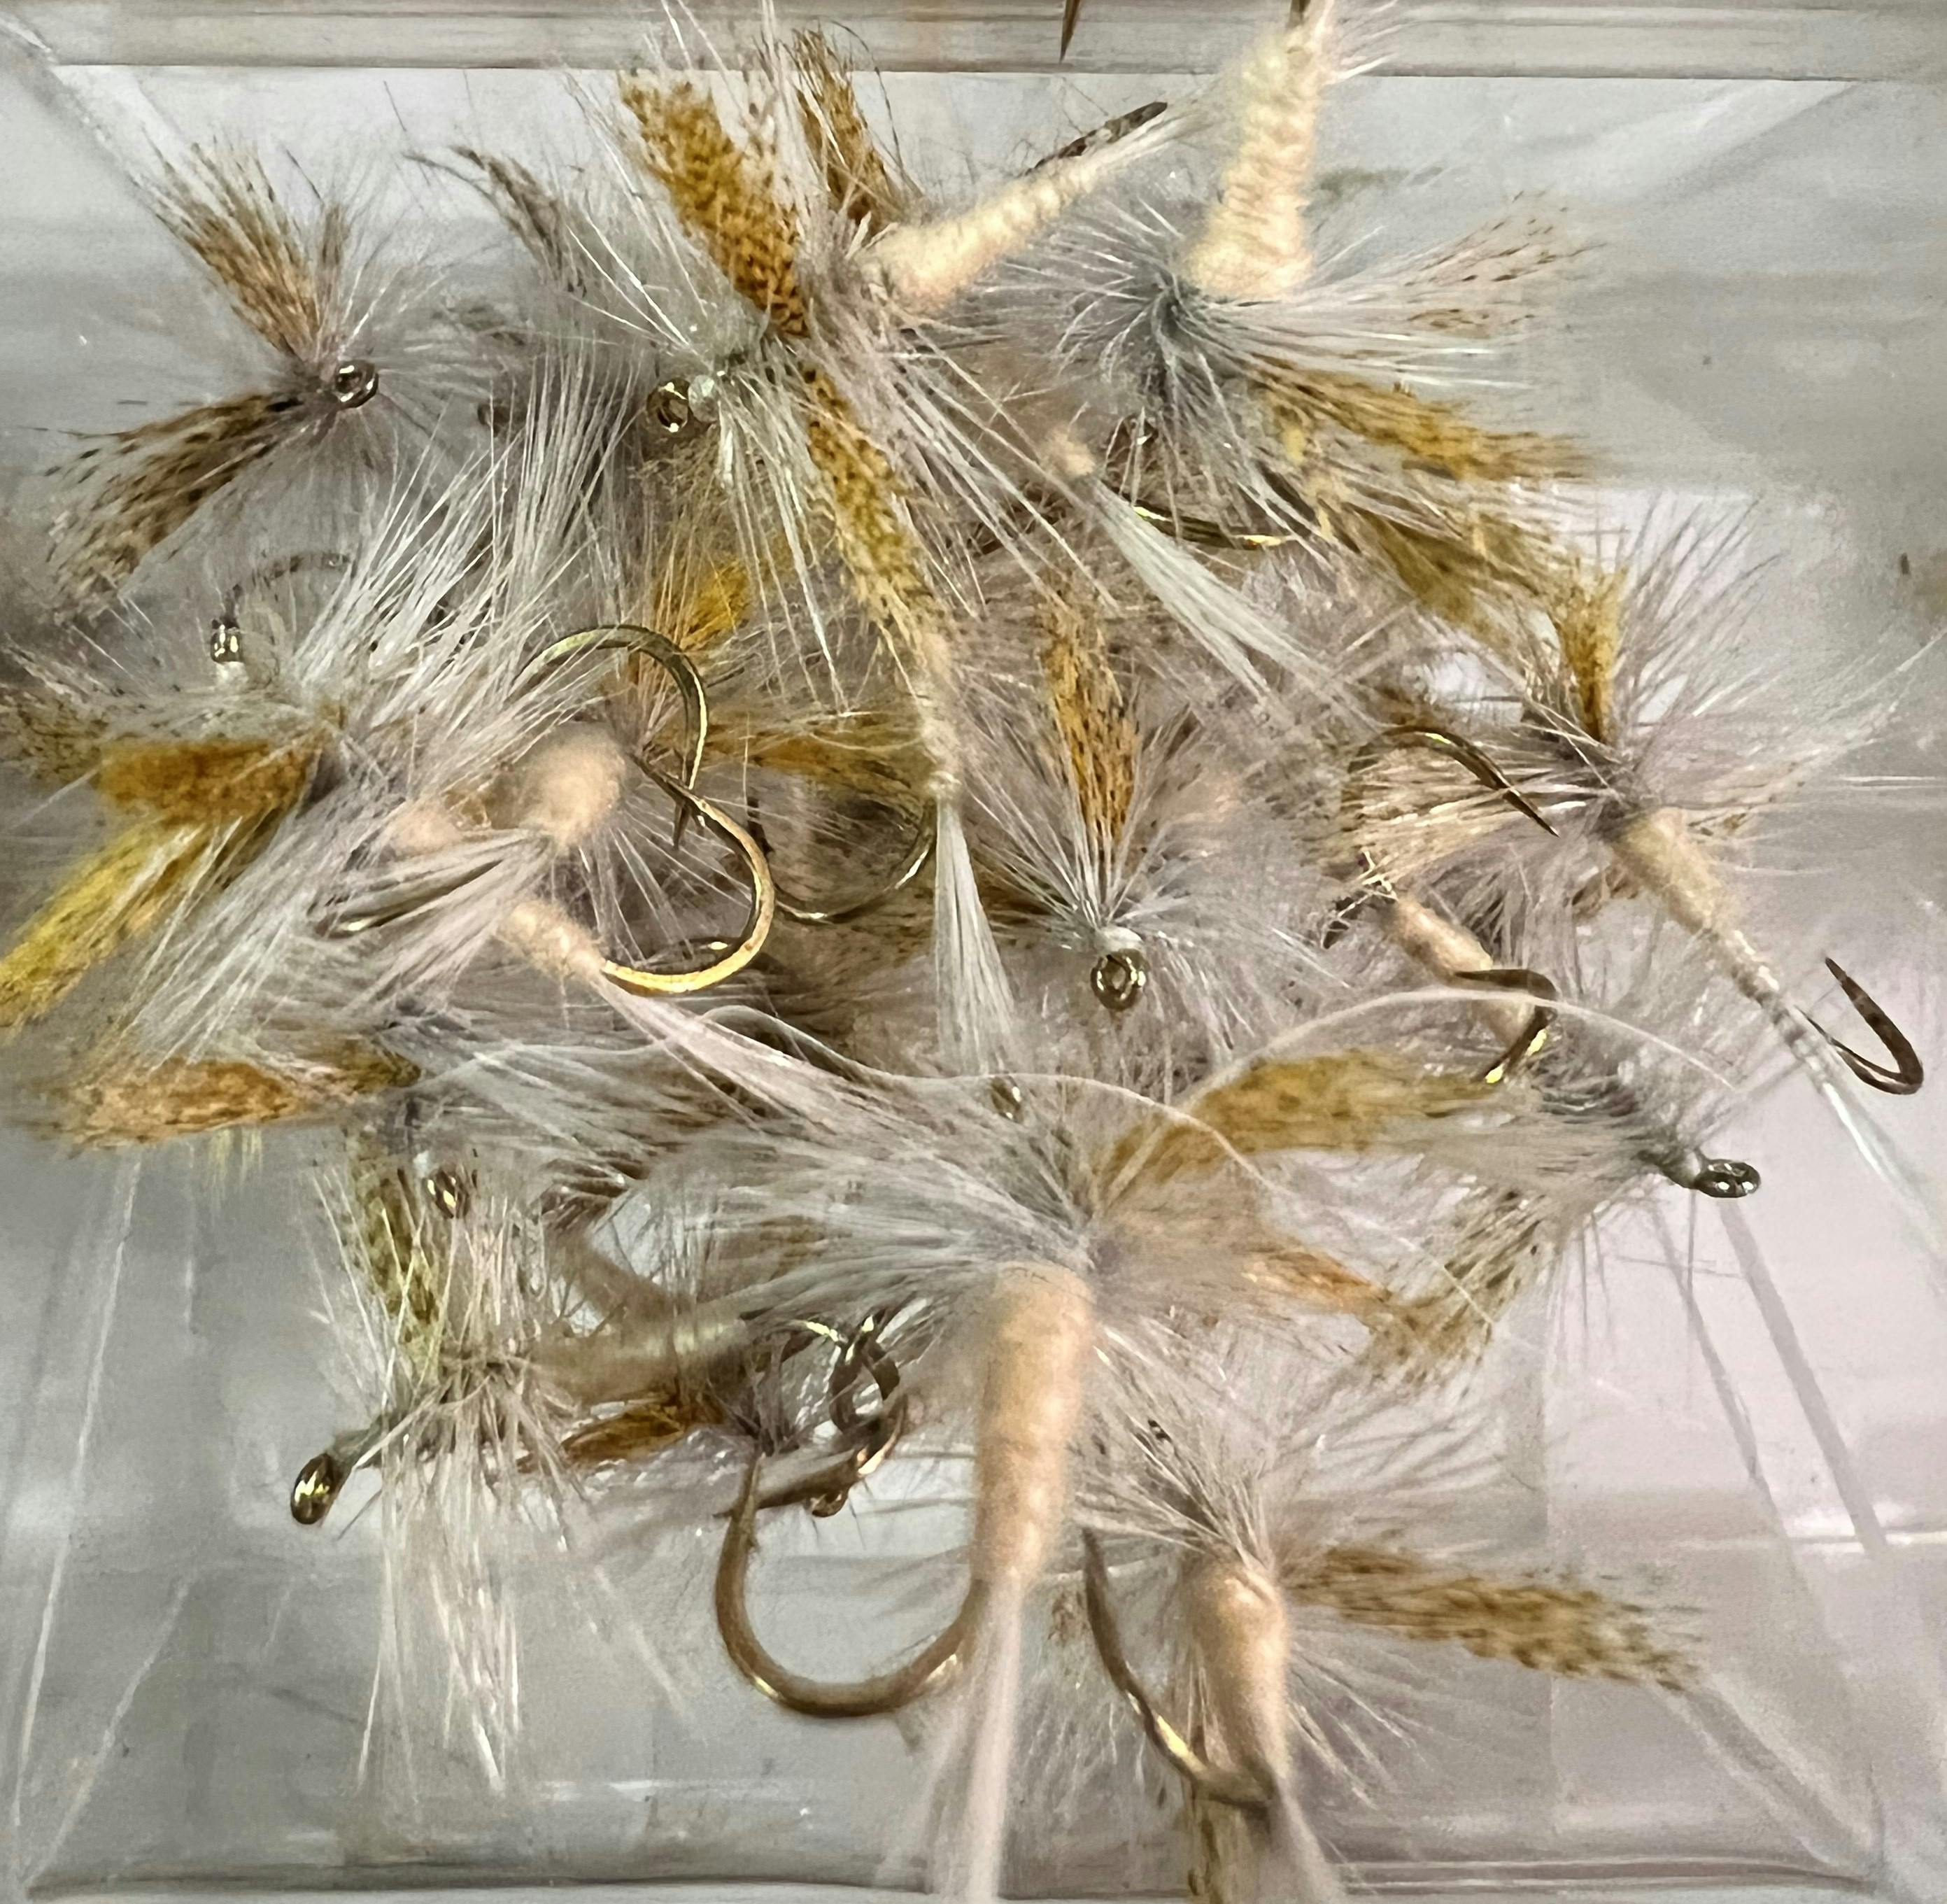 The 12 Best Dry Flies: Patterns and Strategies for Trout Fishing